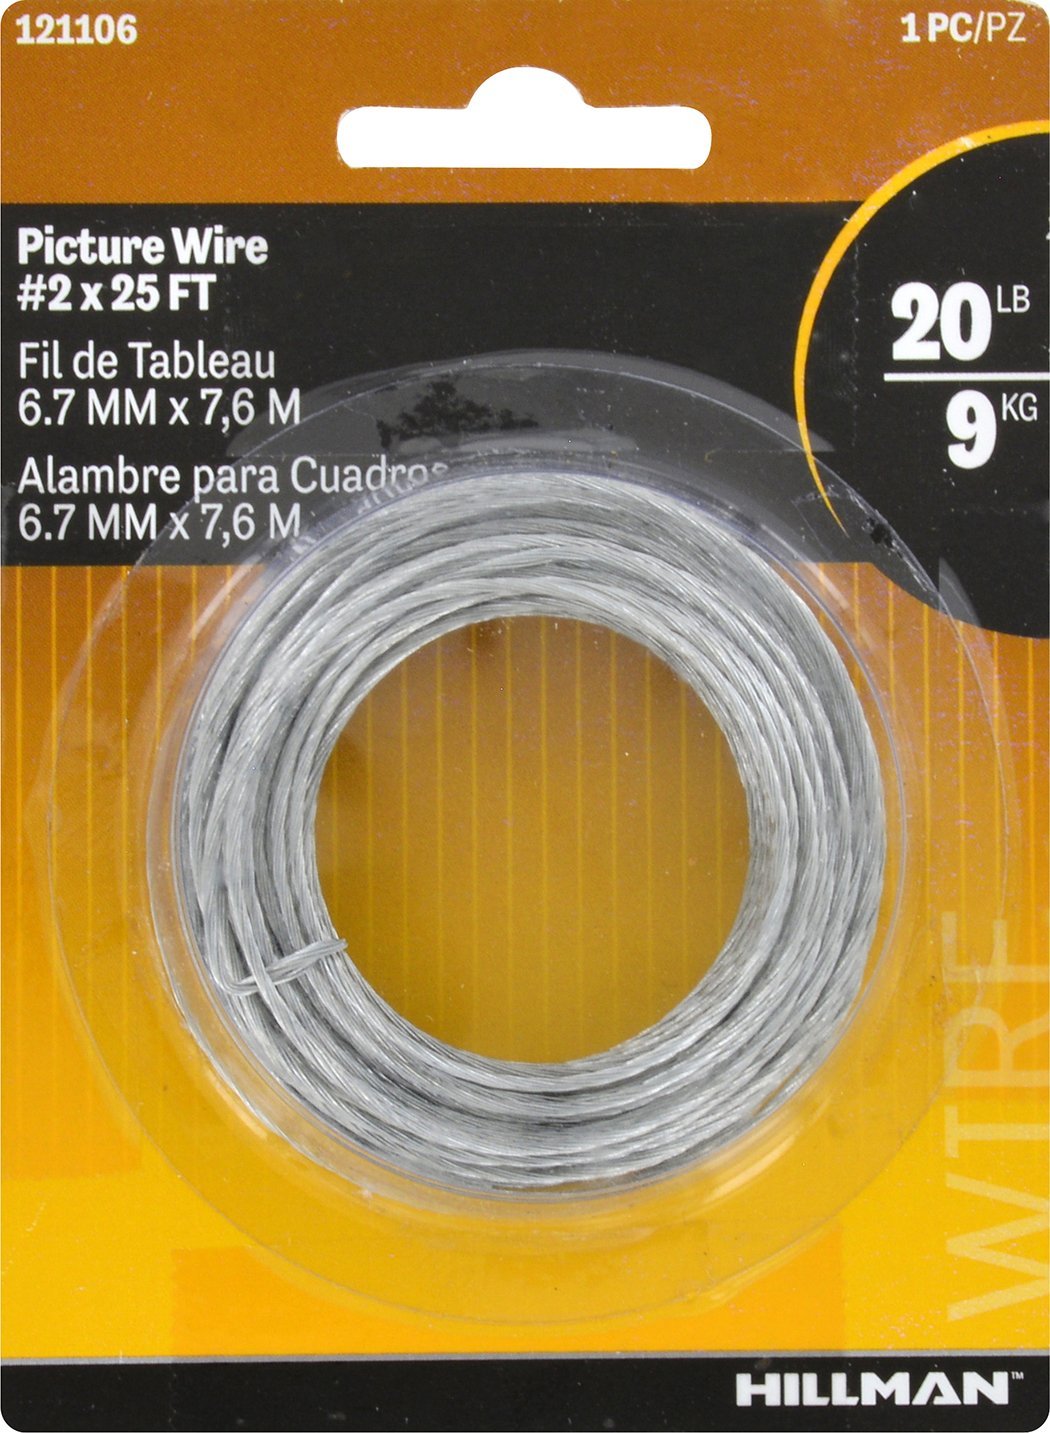 Hillman 20lb Steel Picture Wire - 25ft